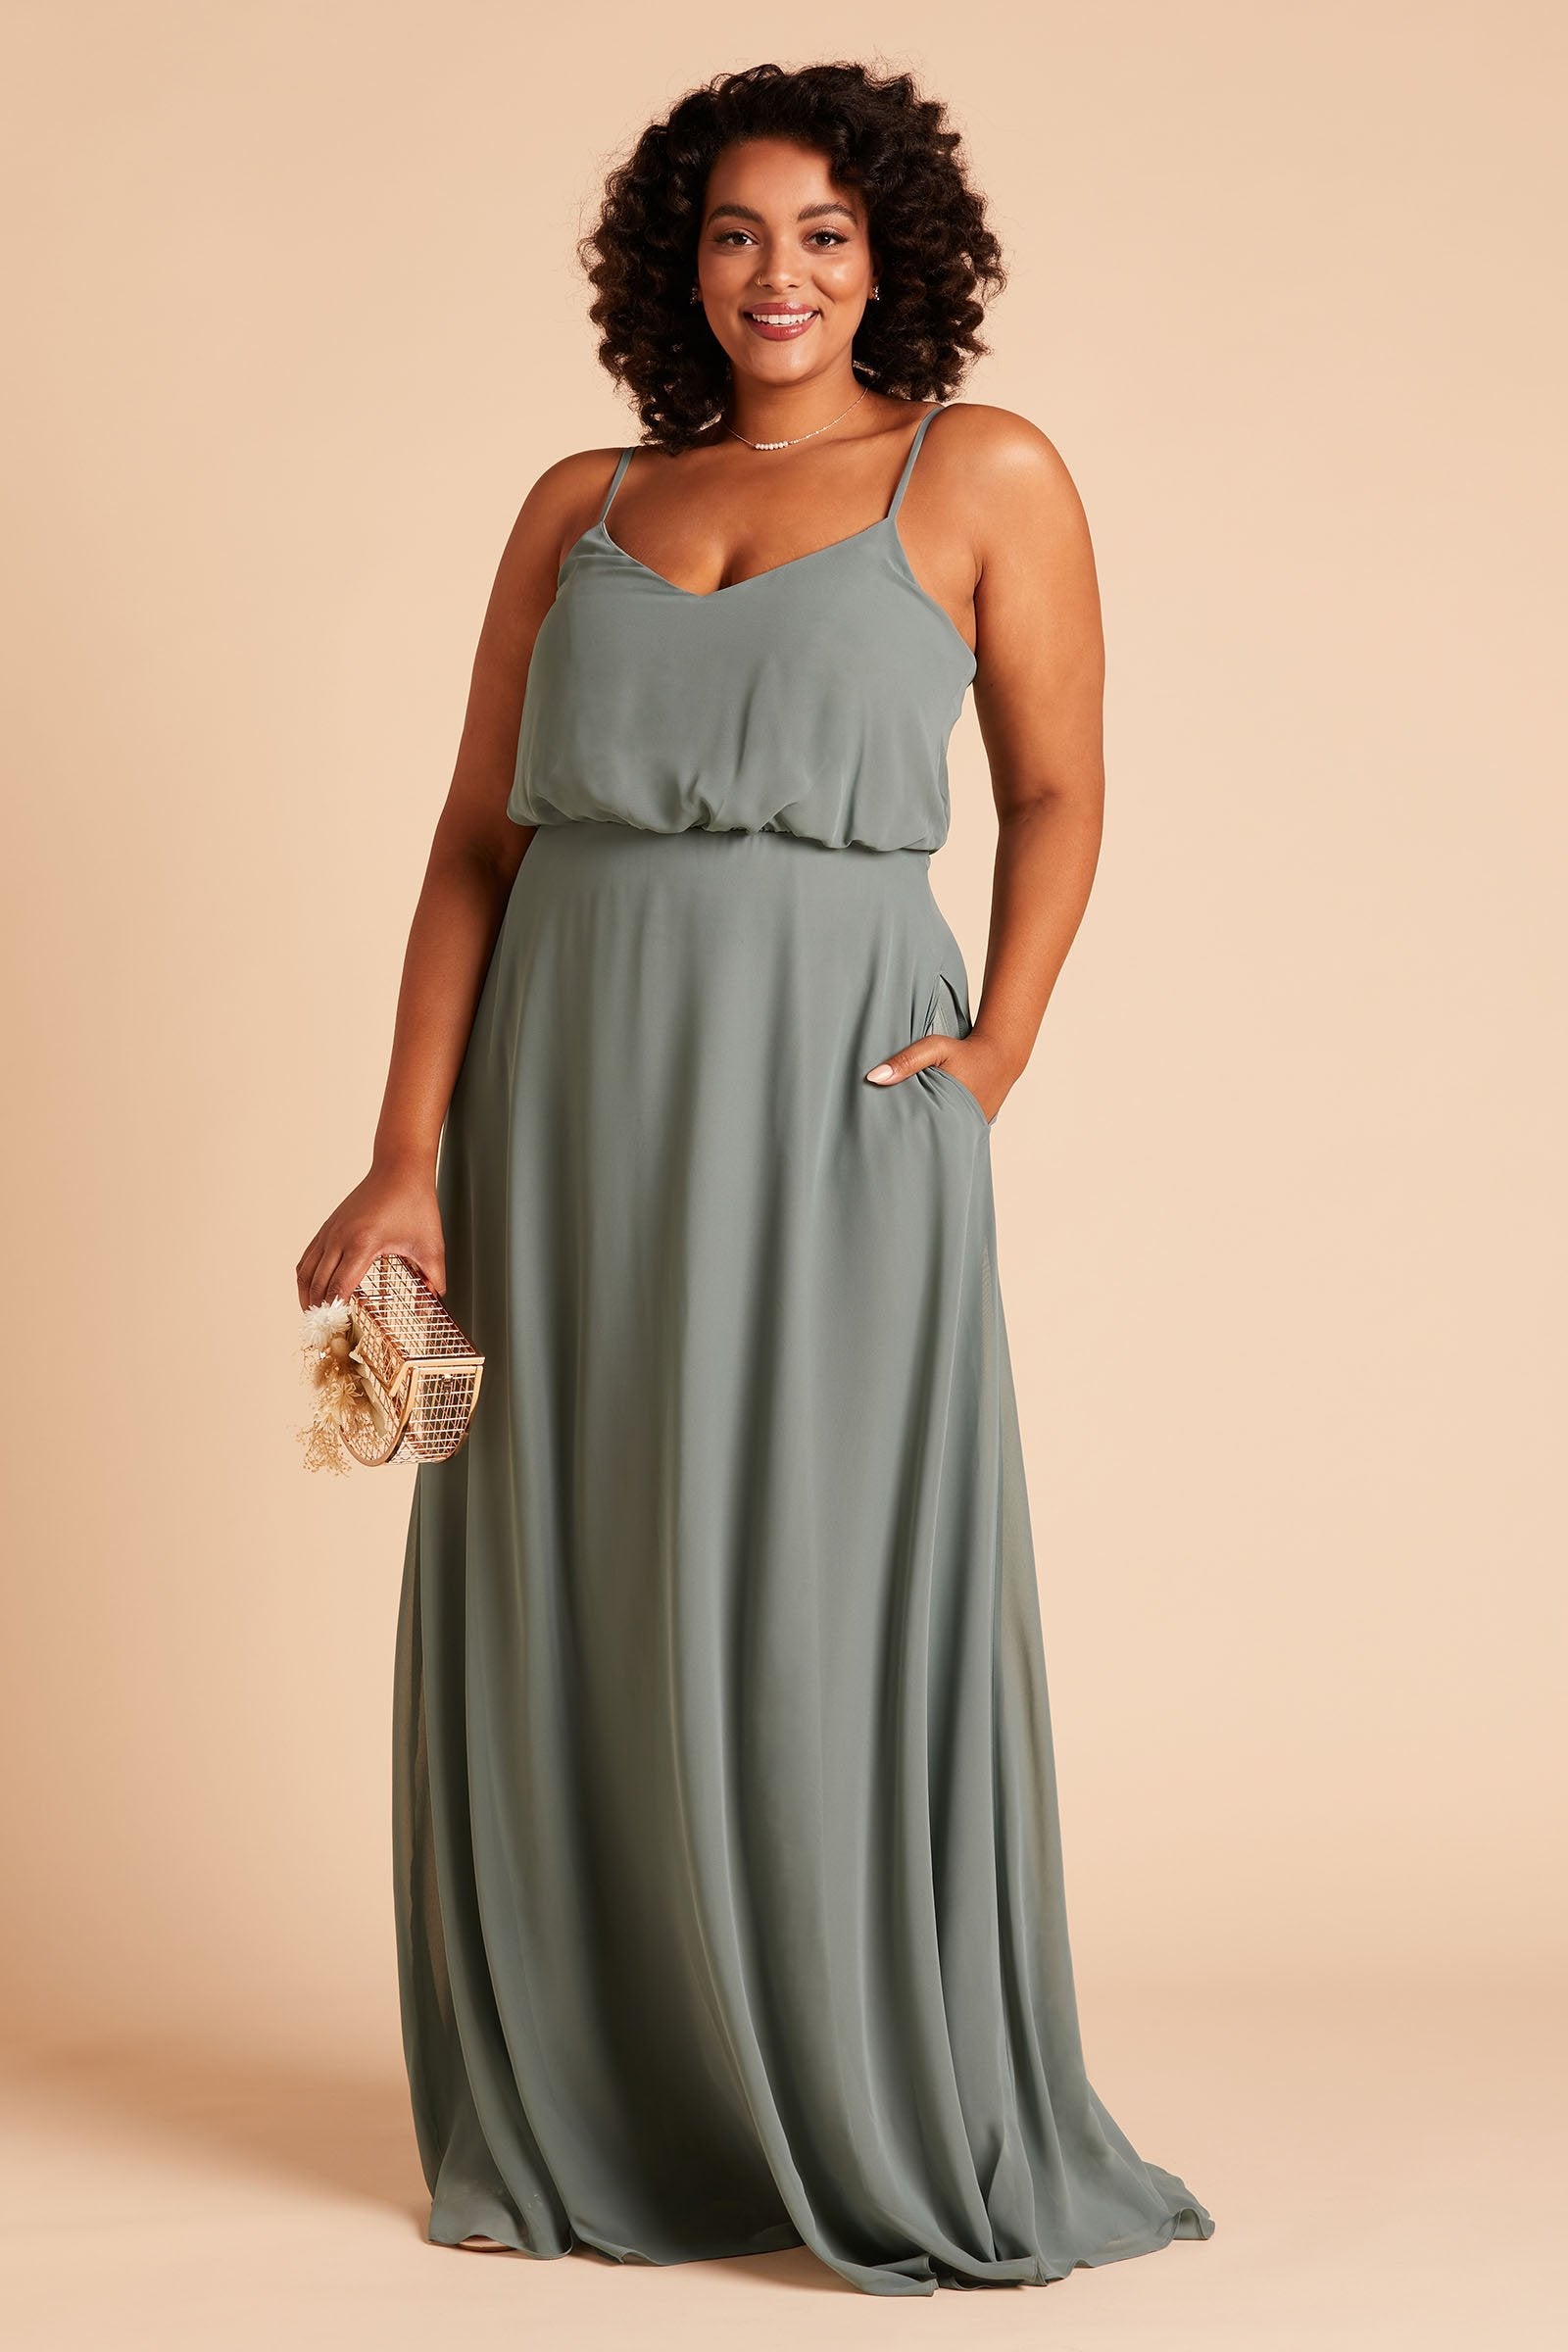 Gwennie plus size bridesmaid dress in sea glass green chiffon by Birdy Grey, front view with hand in pocket